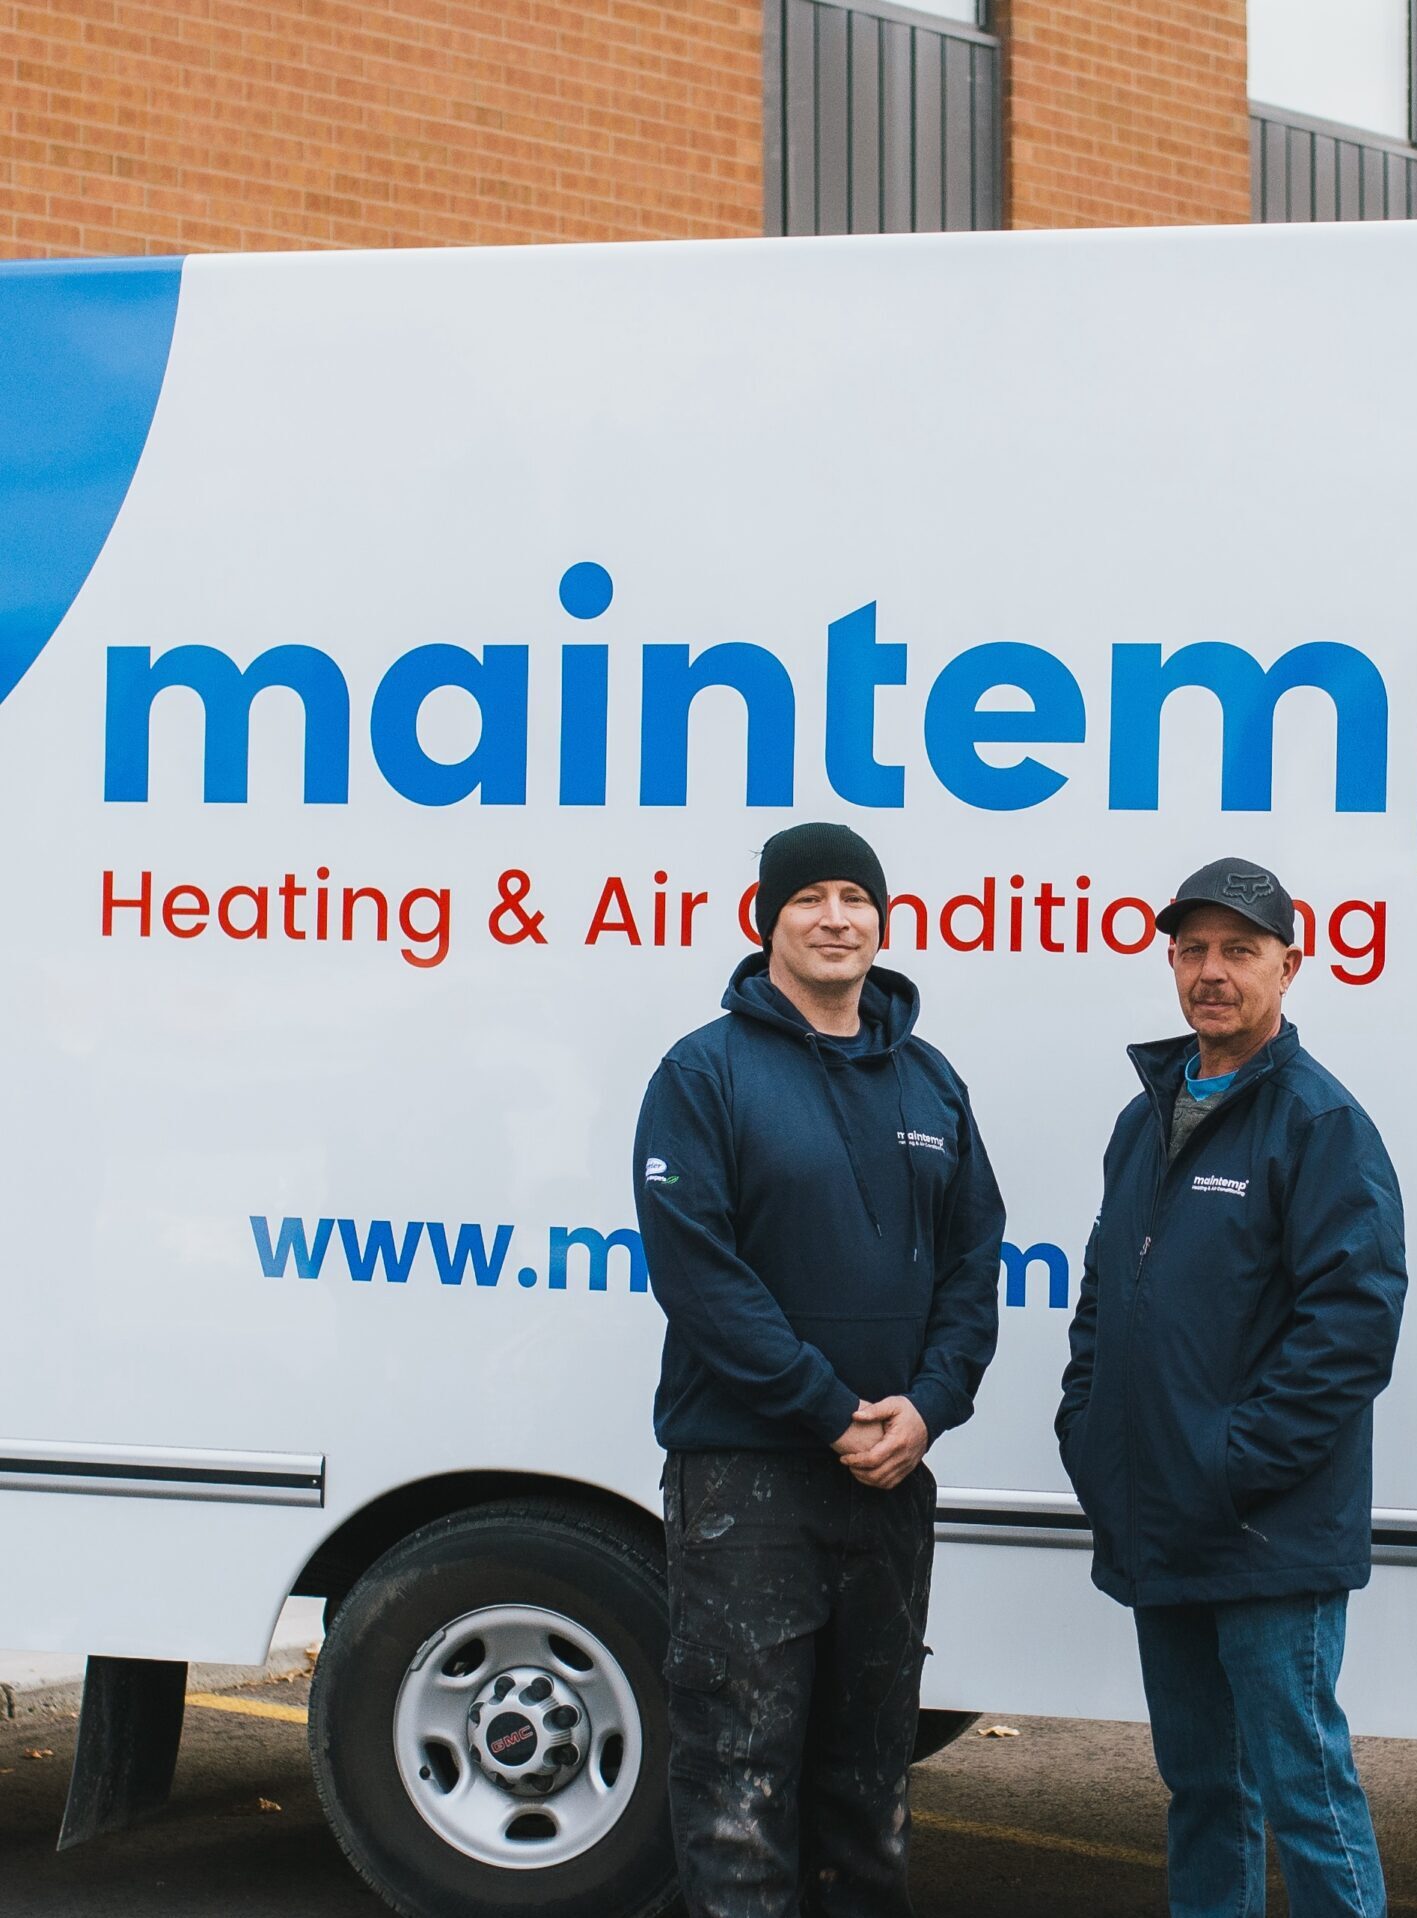 Two people stand in front of a white service van with "maintemp Heating & Air Conditioning" written on it, smiling slightly, in work attire.